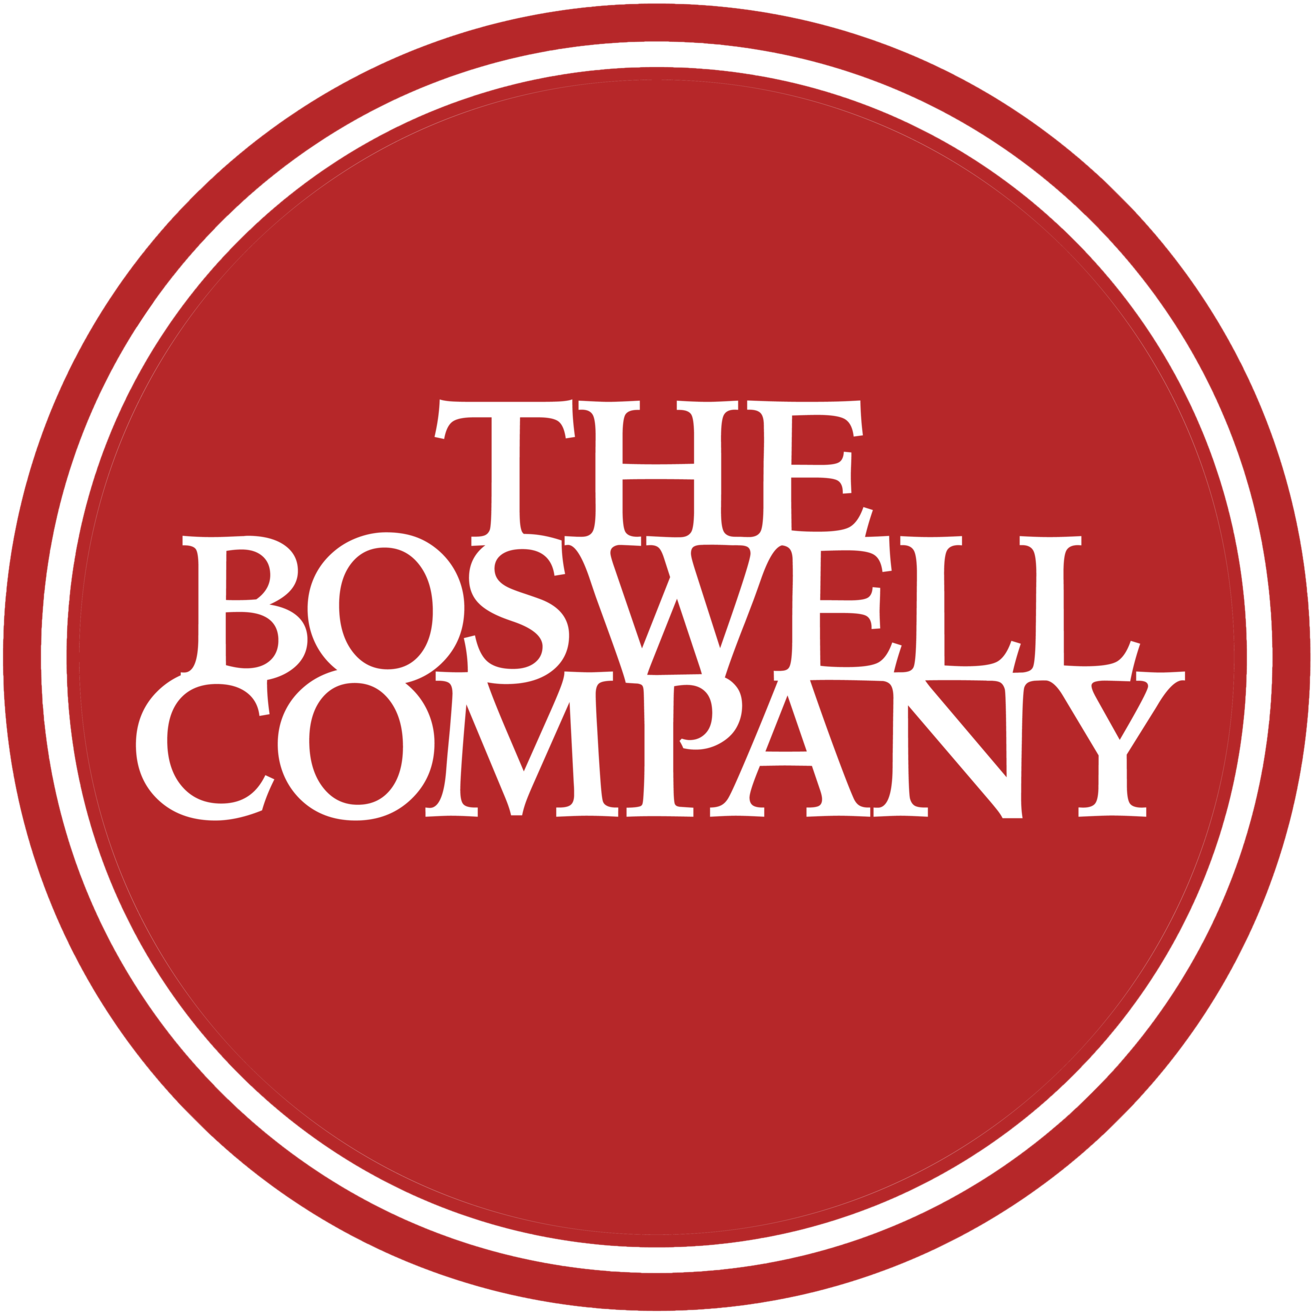 The Boswell Company